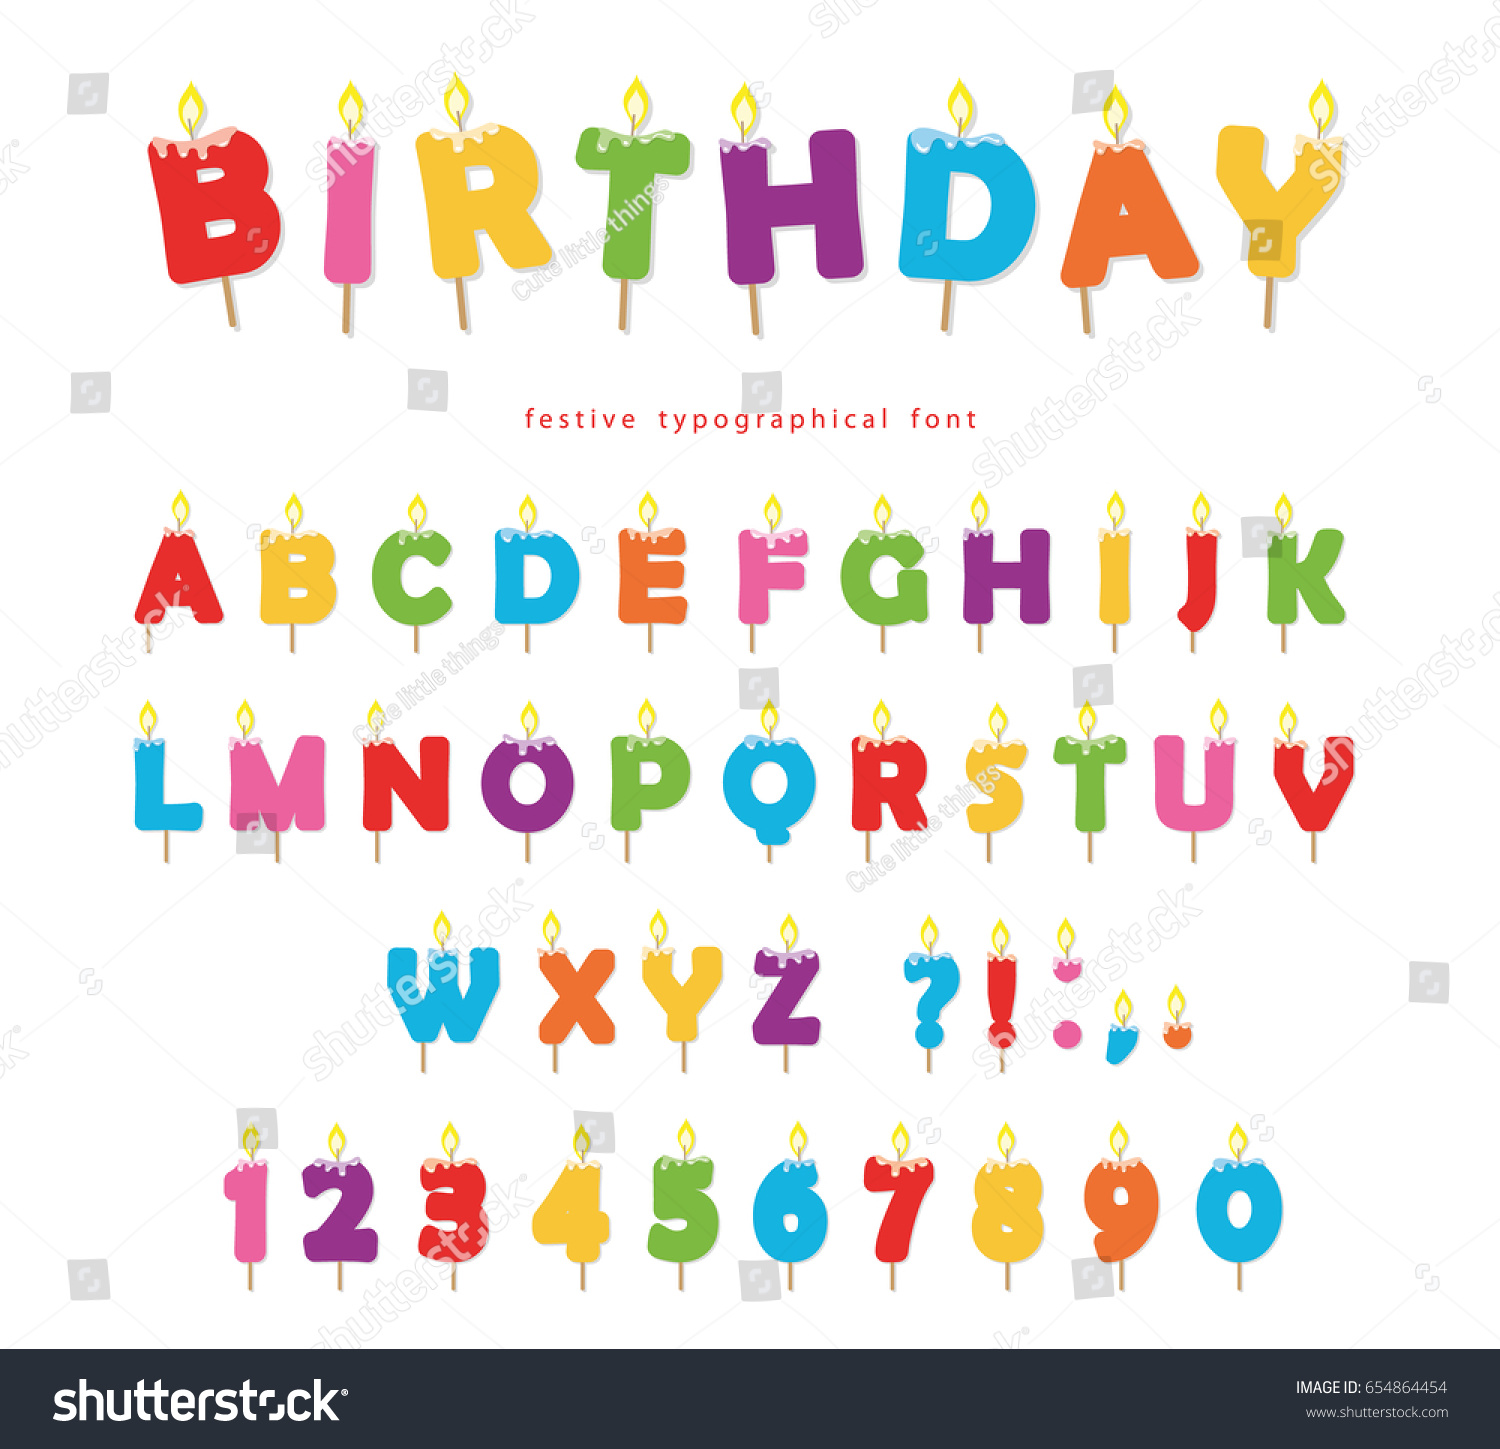 SVG of Birthday candles colorful font design. Bright festive ABC letters and numbers isolated on white. svg